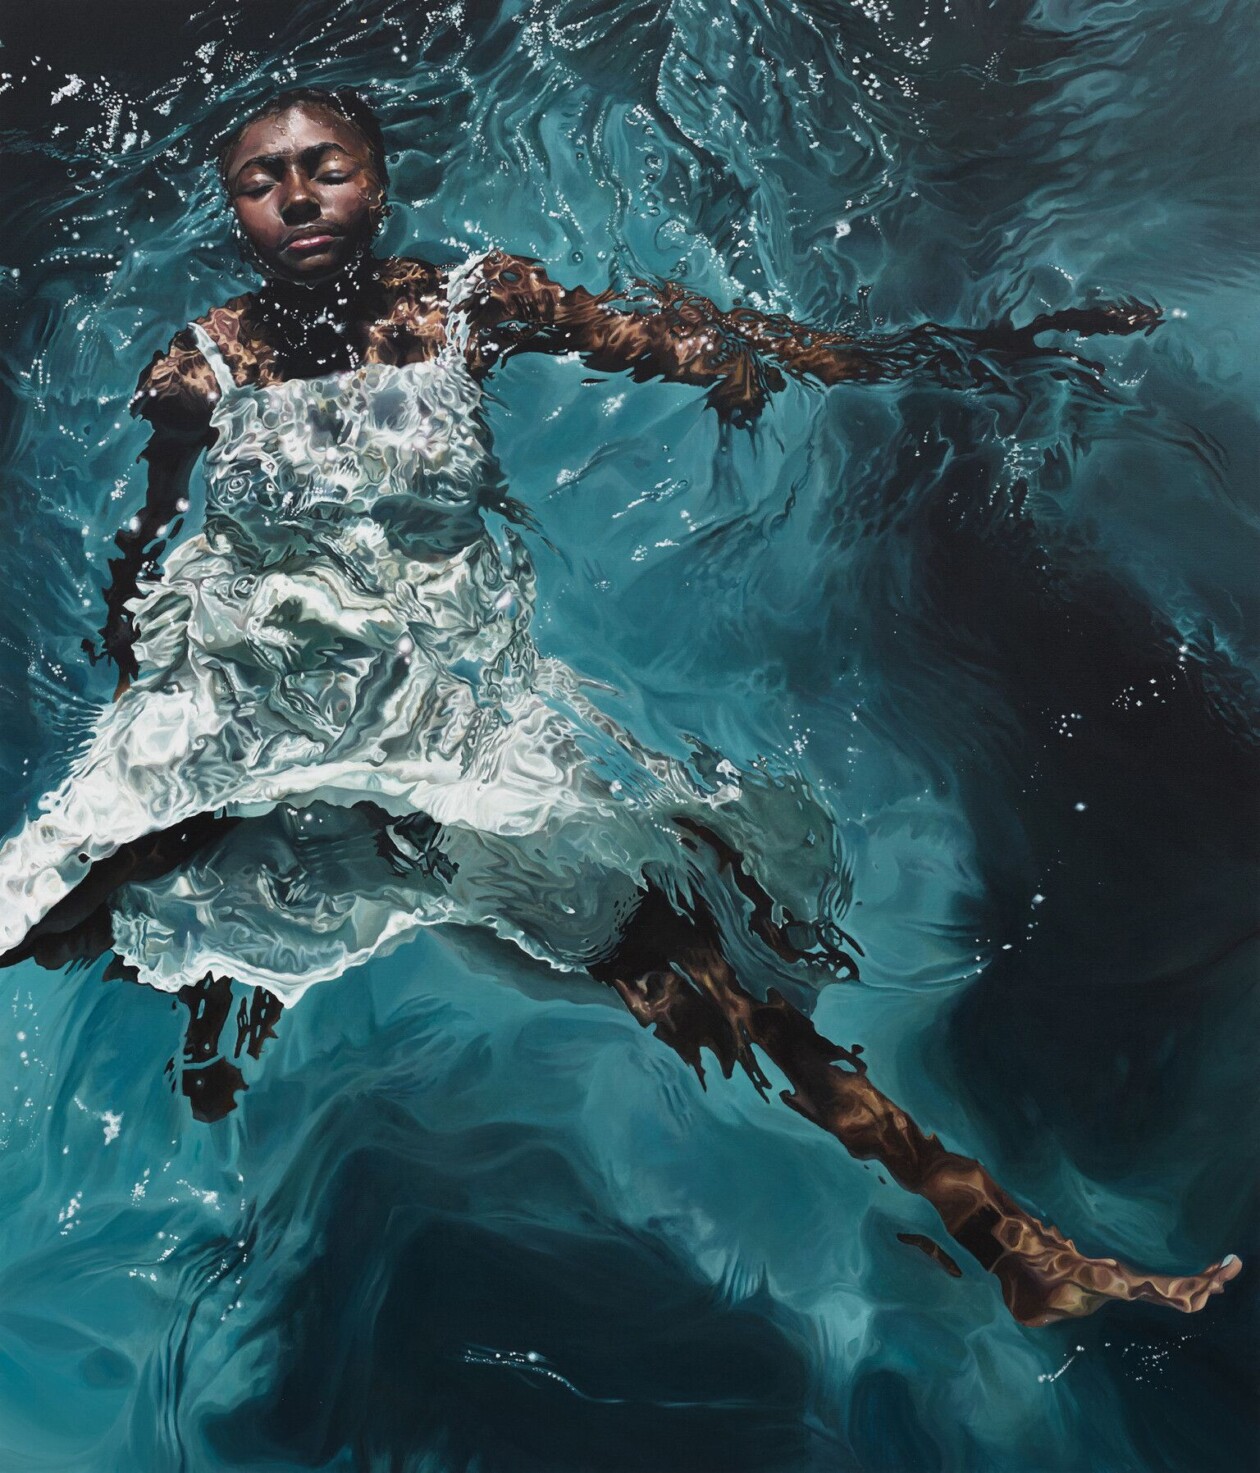 Photorealistic Paintings Of Contemplative And Serene Swimmers By Calida Rawles (2)